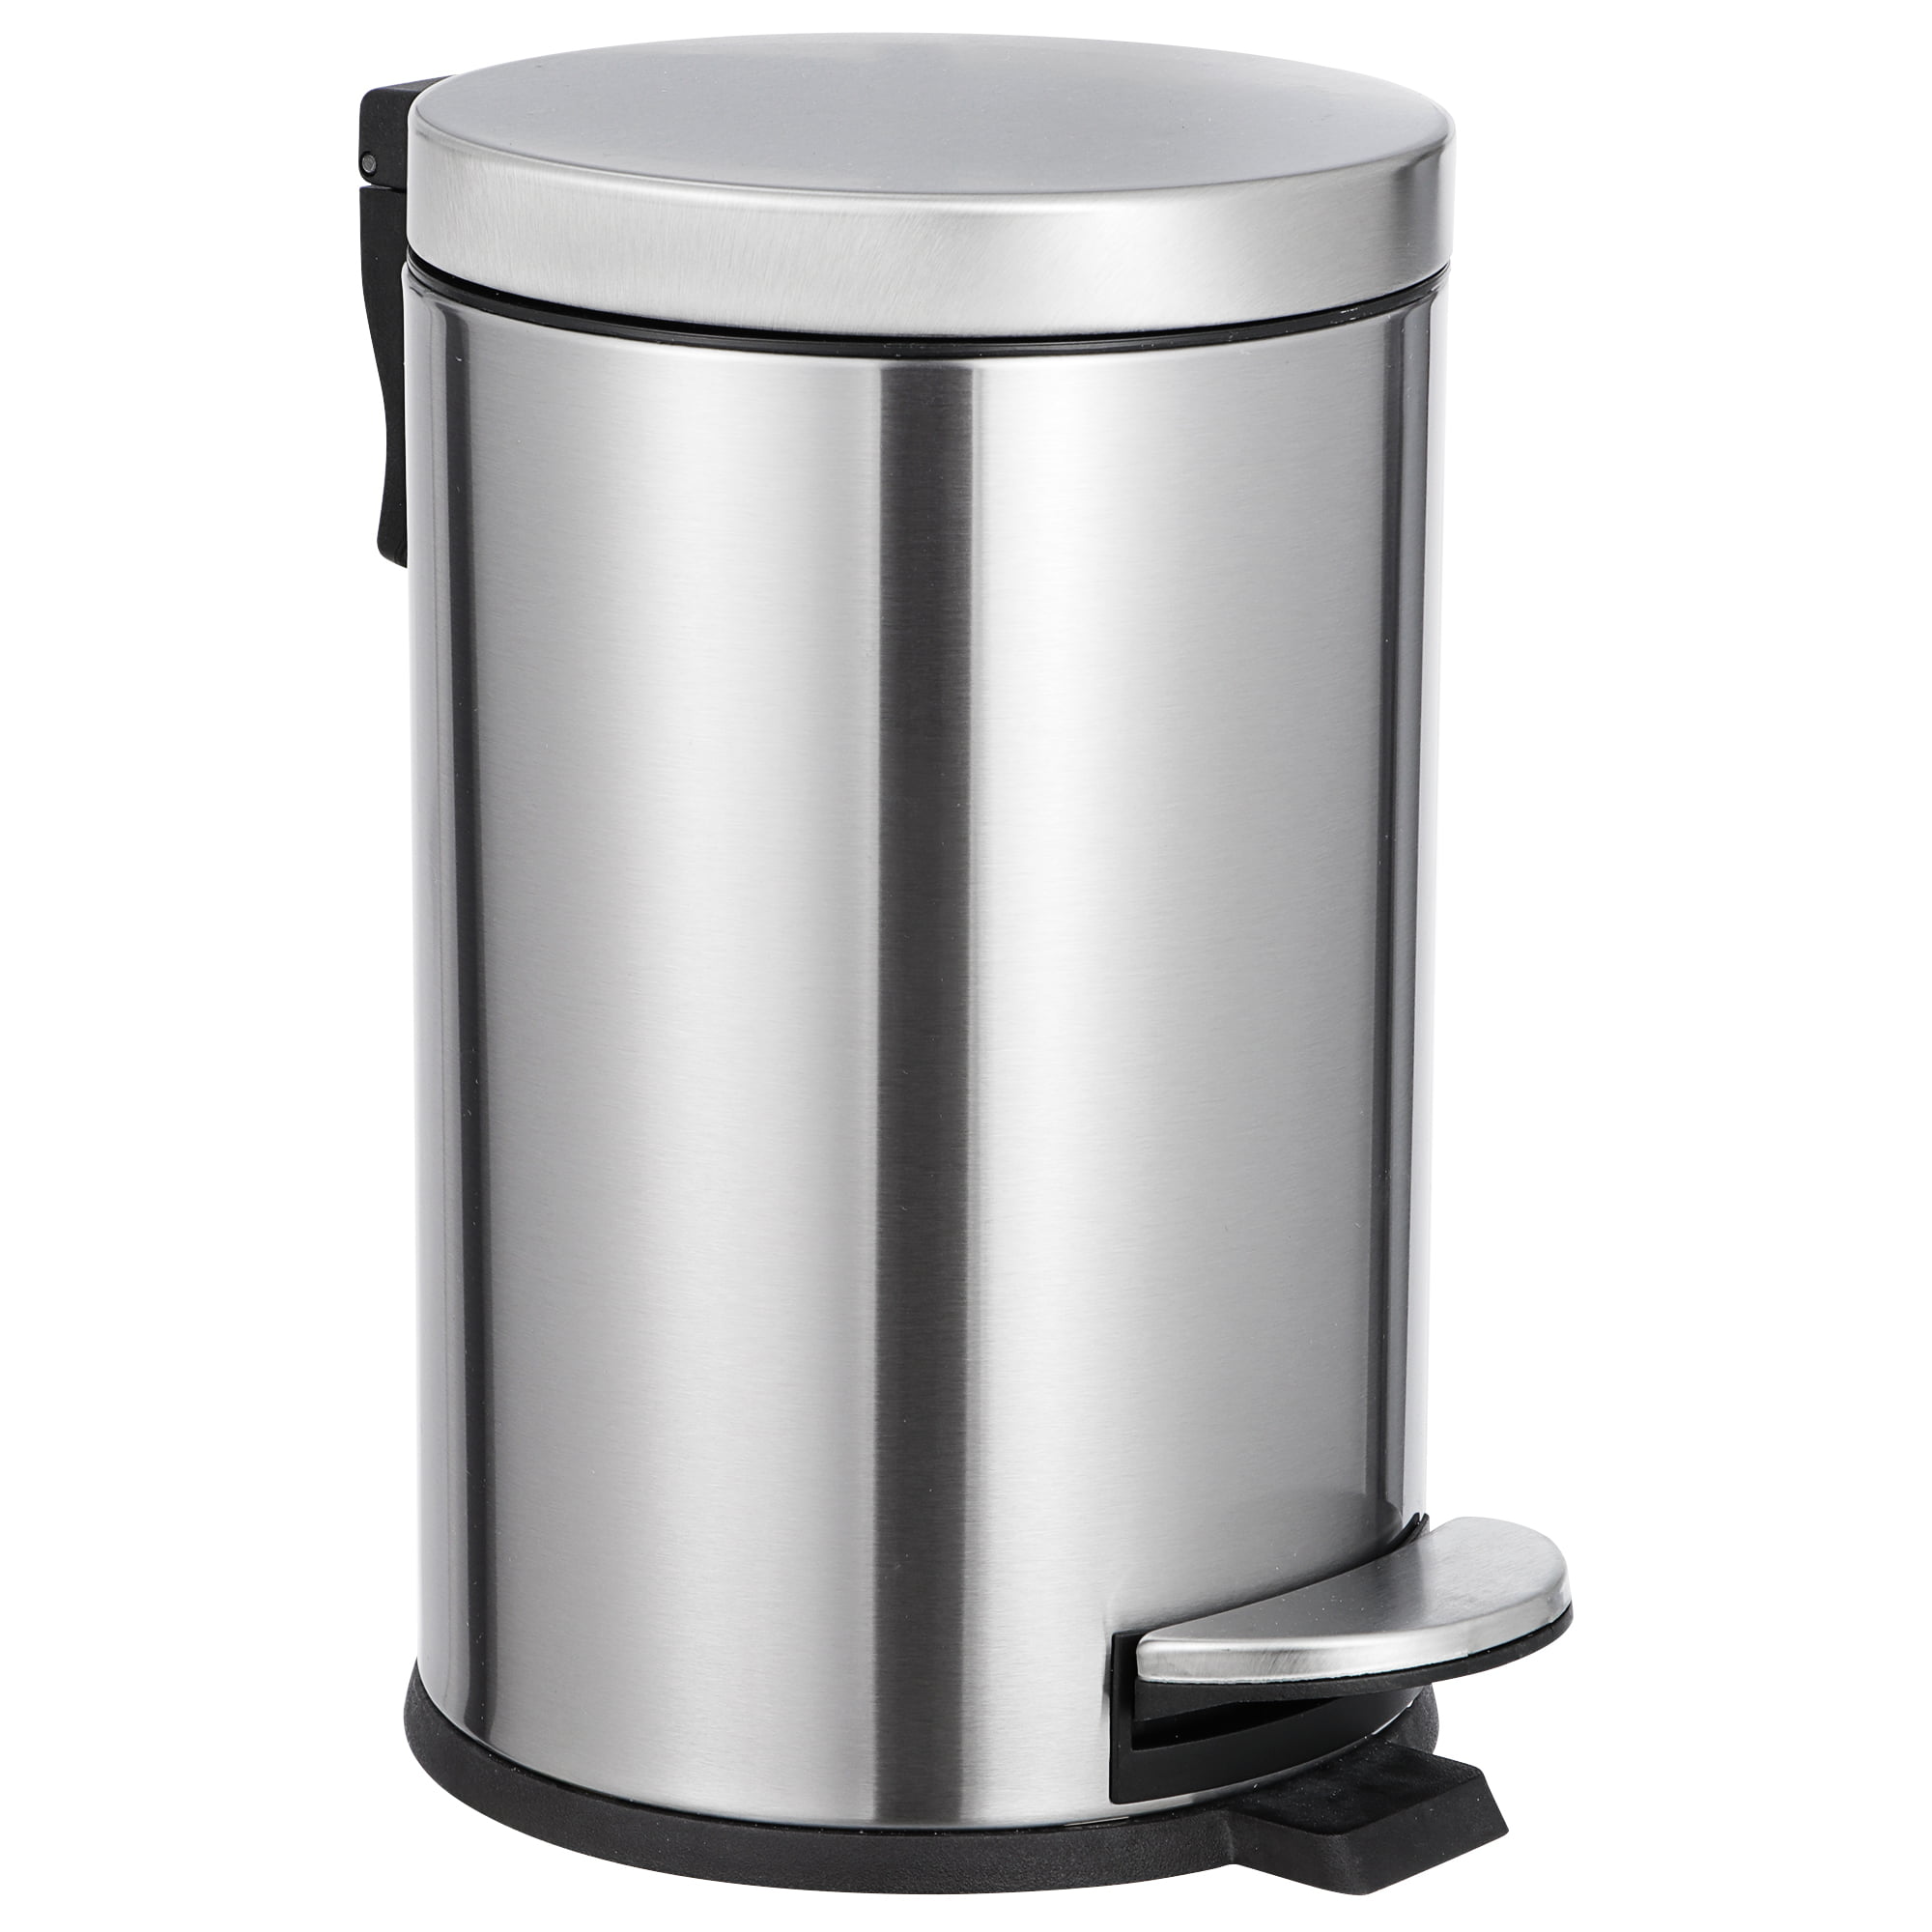 Bolero White Pedal Bin in Stainless Steel with Removal Inner Bucket 5L 